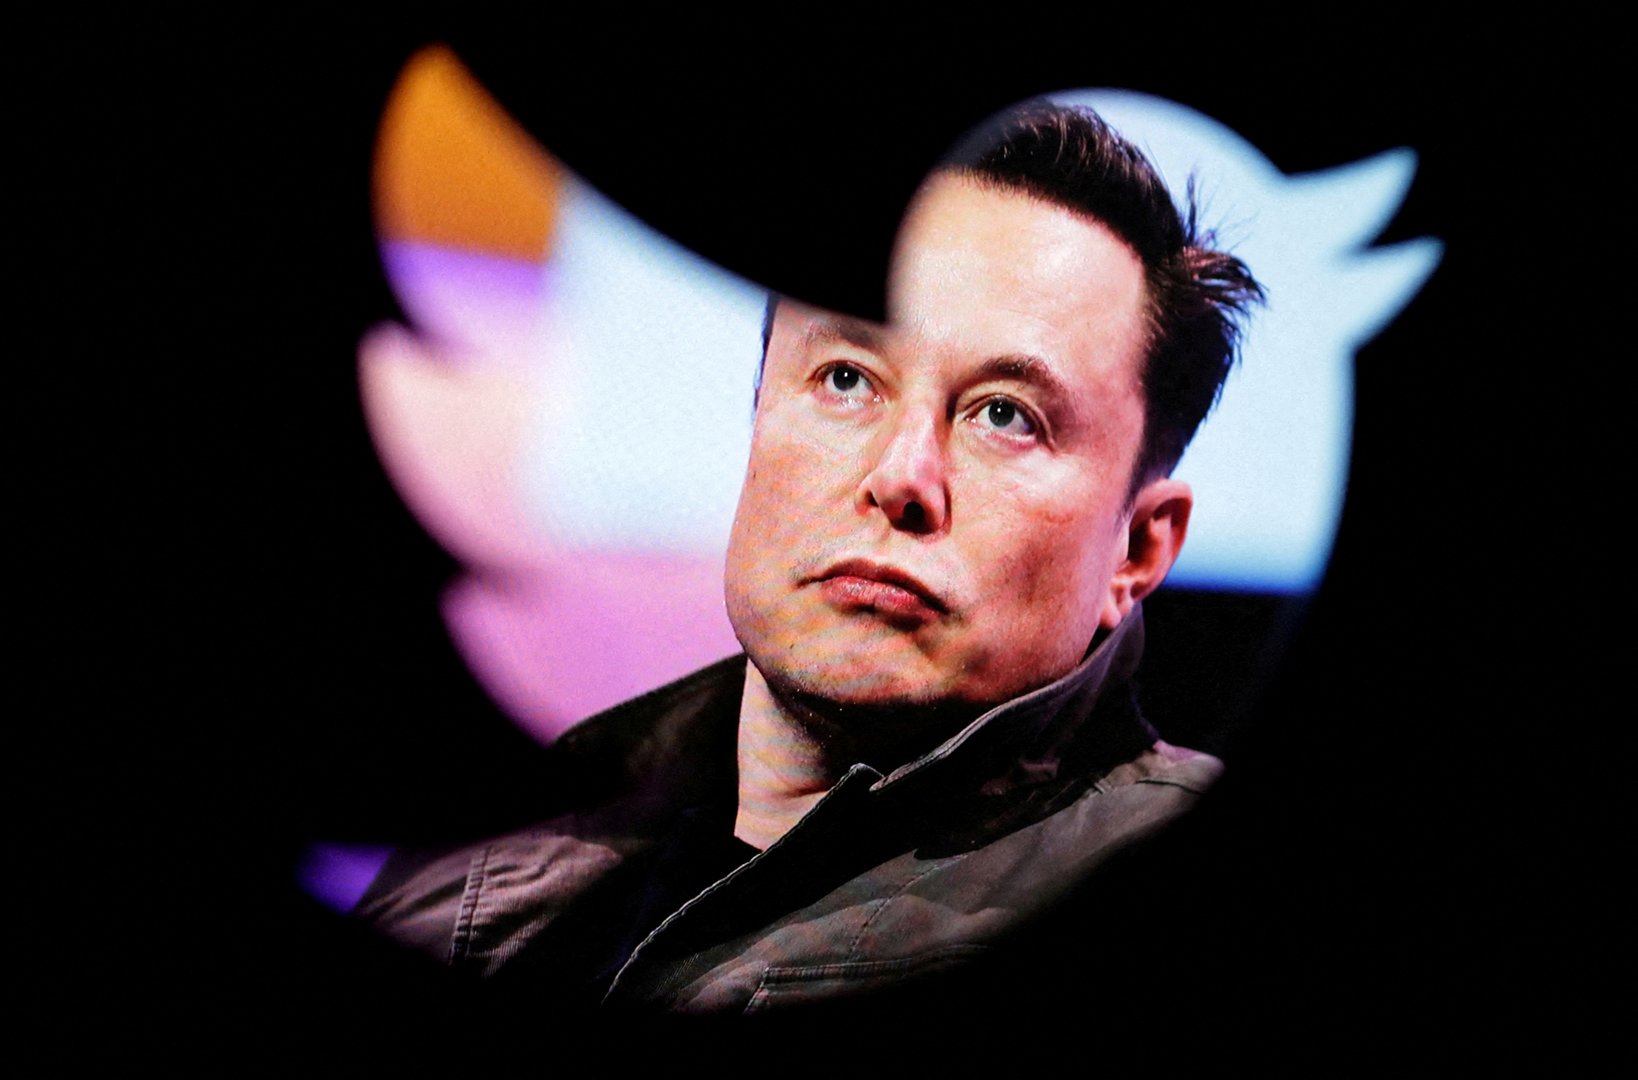 image Germany tells Musk it expects Twitter to fight disinformation